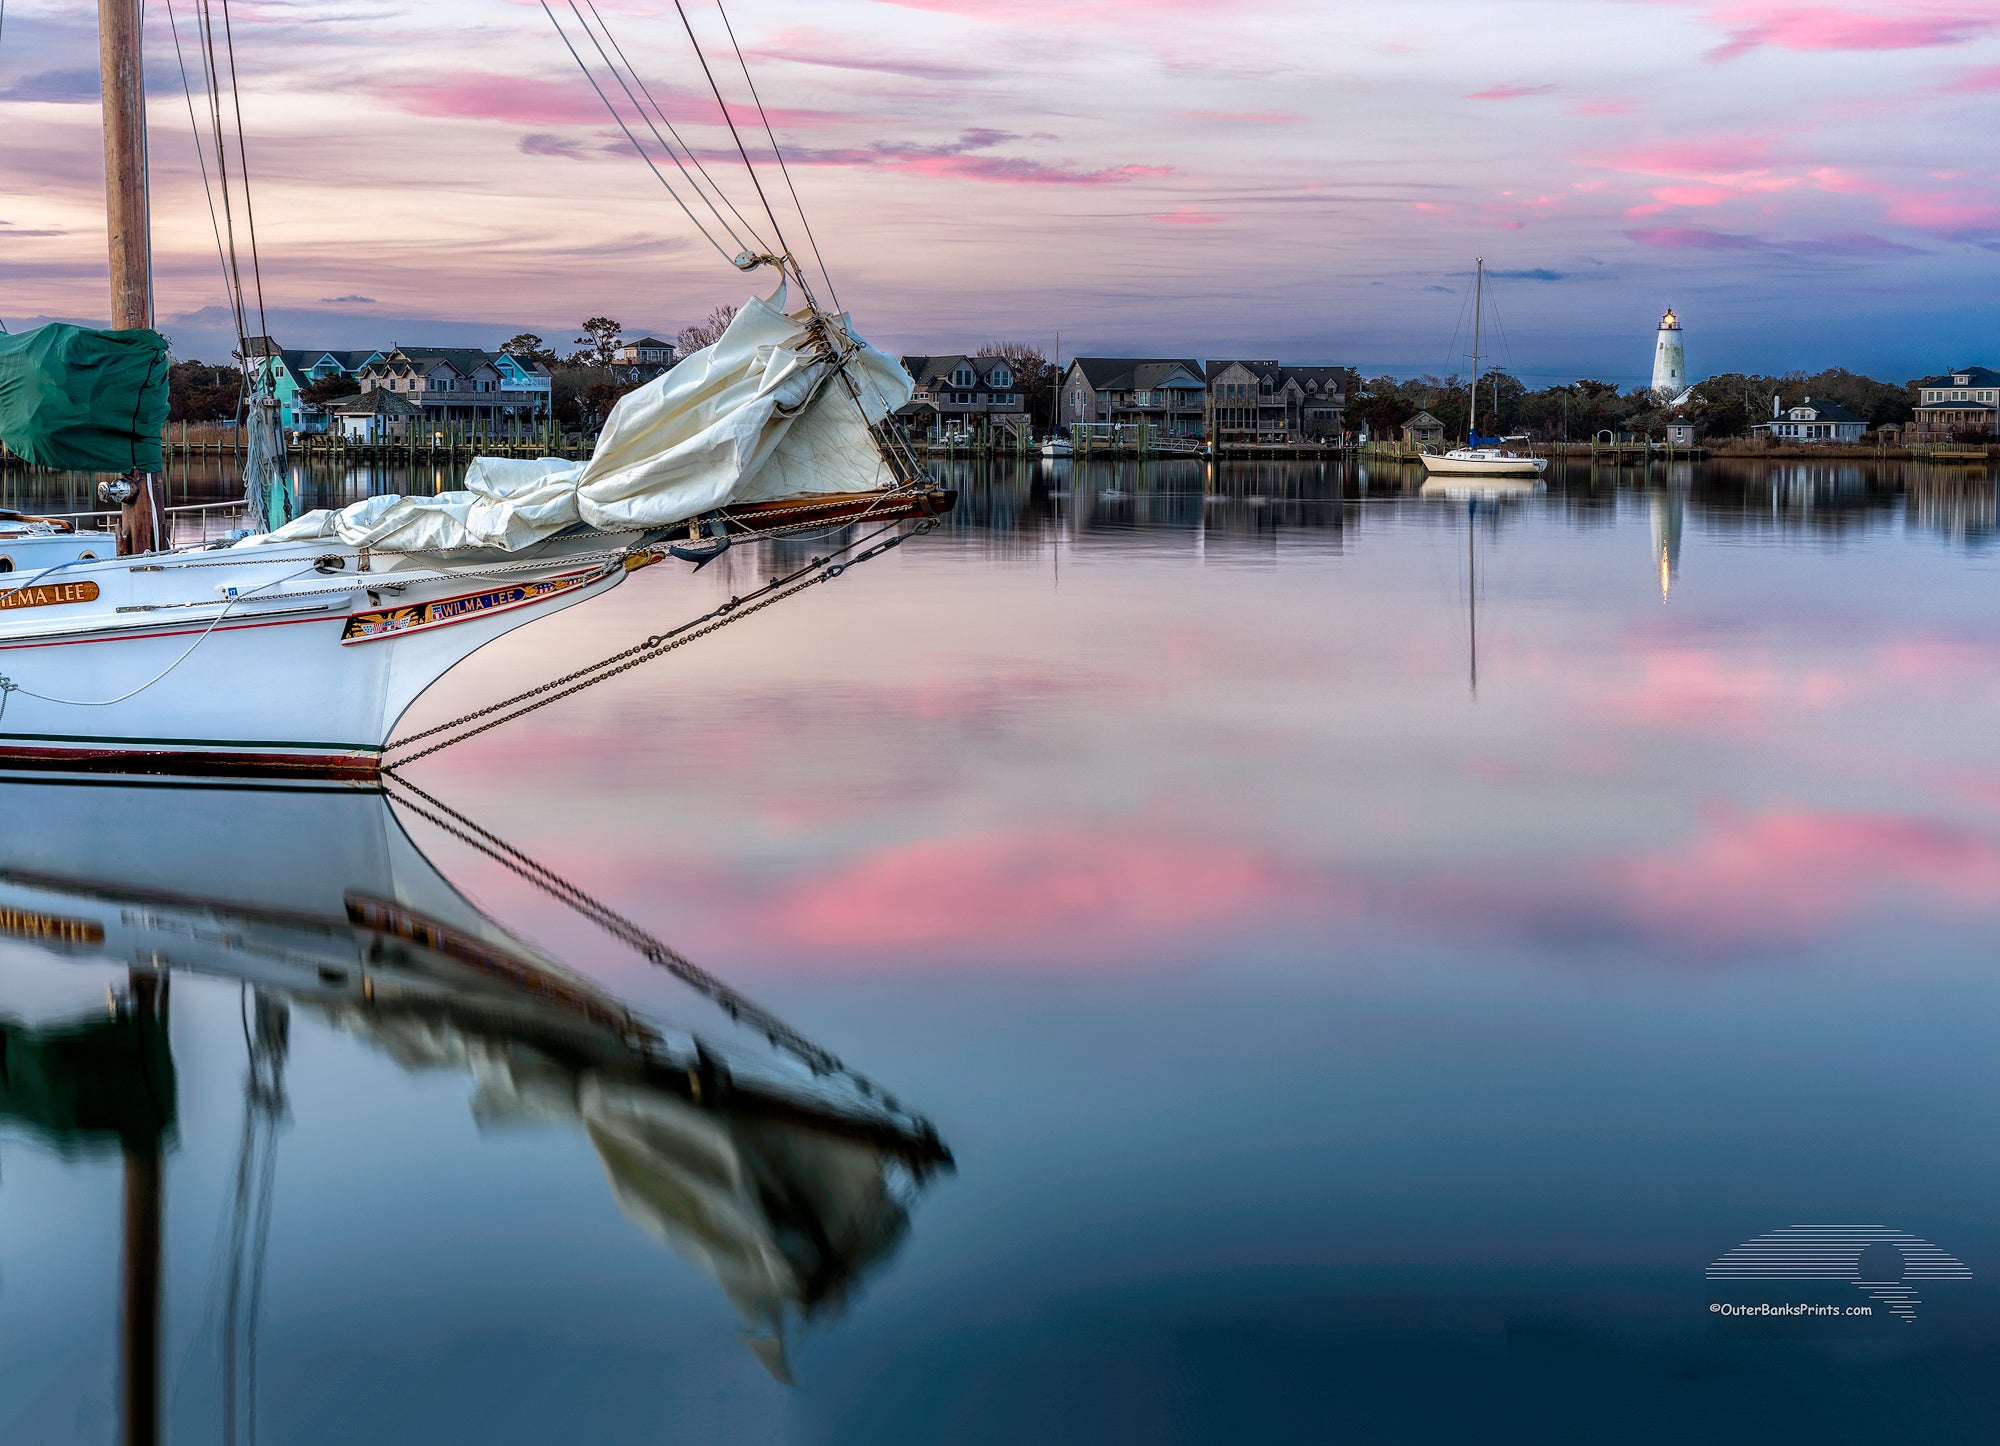 Sail boat and reflection at twilight on Silver Lake Ocracoke Island, Outer Banks, NC.